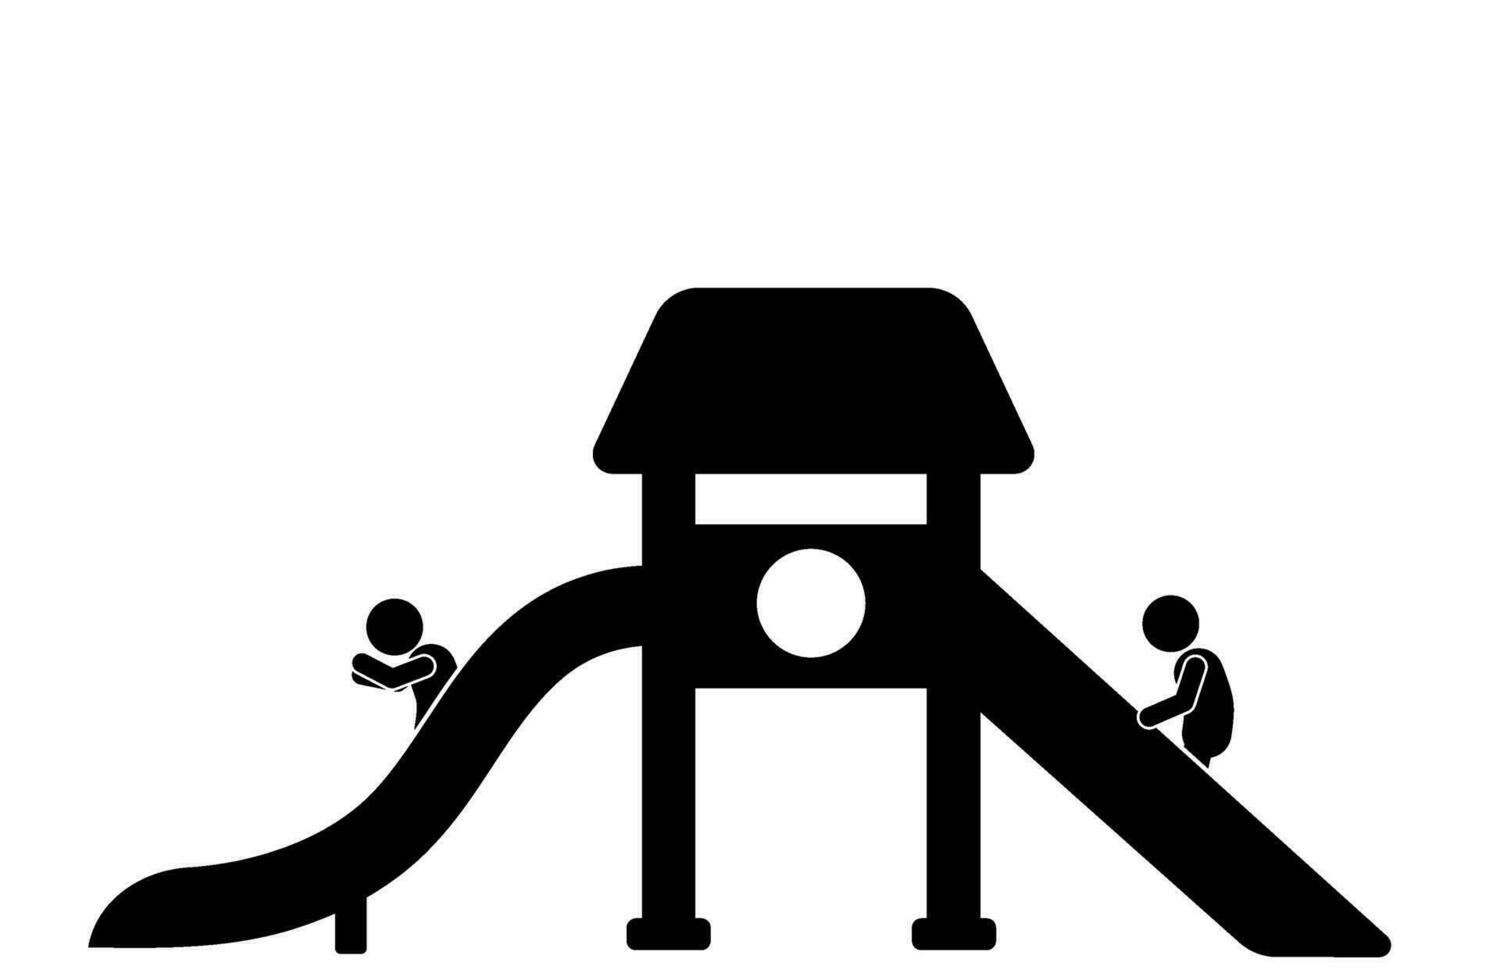 Vector Illustration of Children Playing at an Outdoor Playground